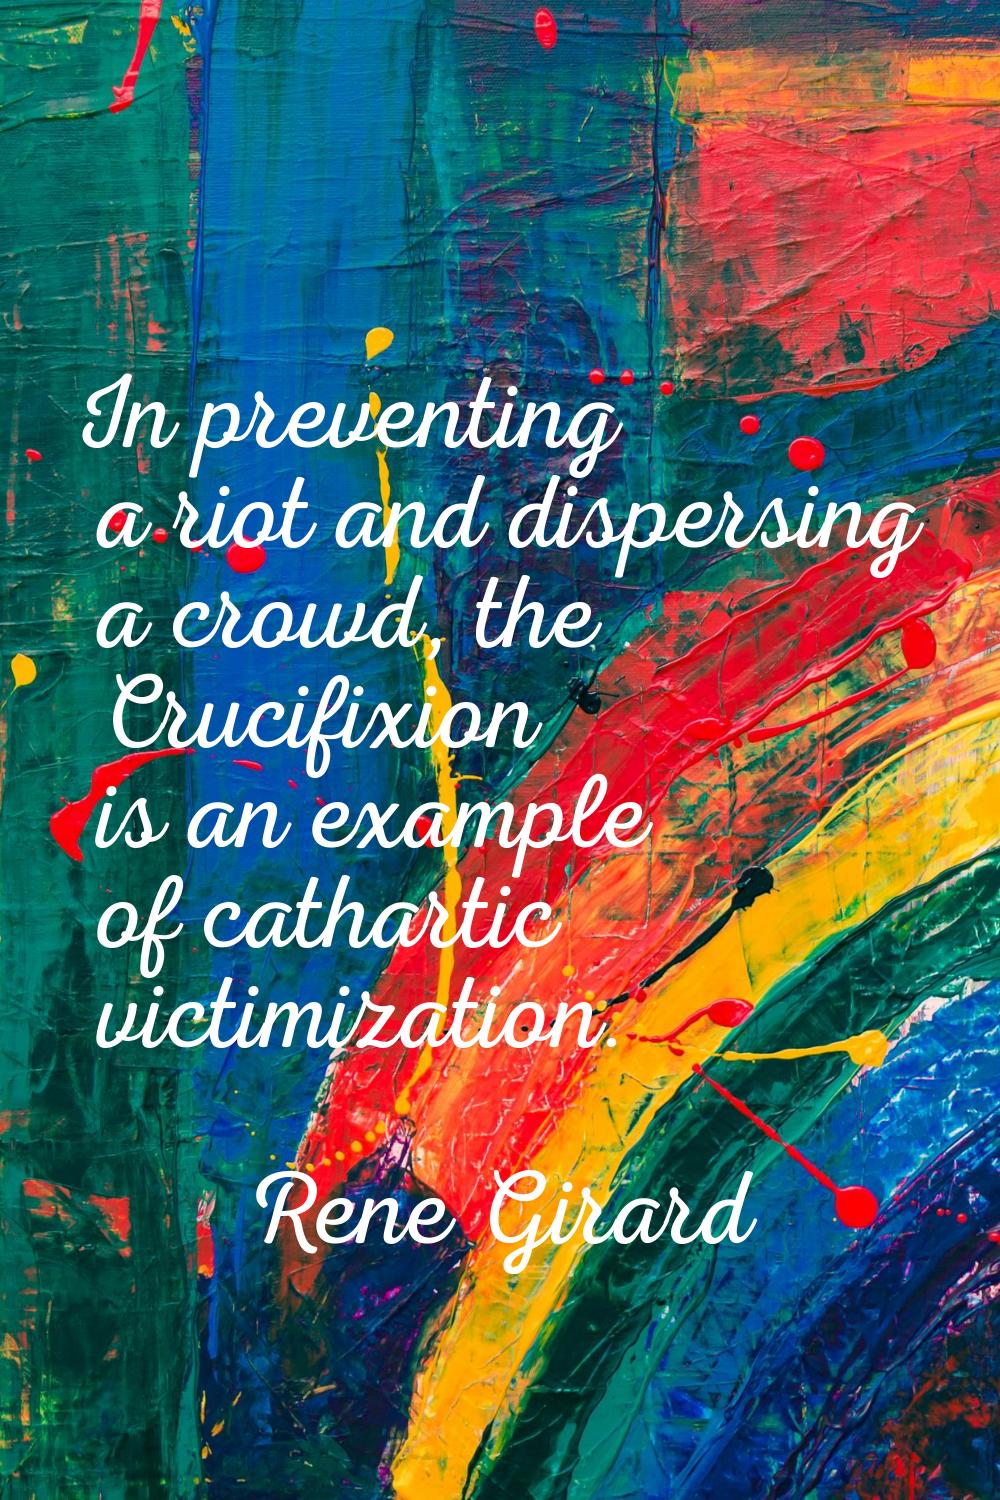 In preventing a riot and dispersing a crowd, the Crucifixion is an example of cathartic victimizati